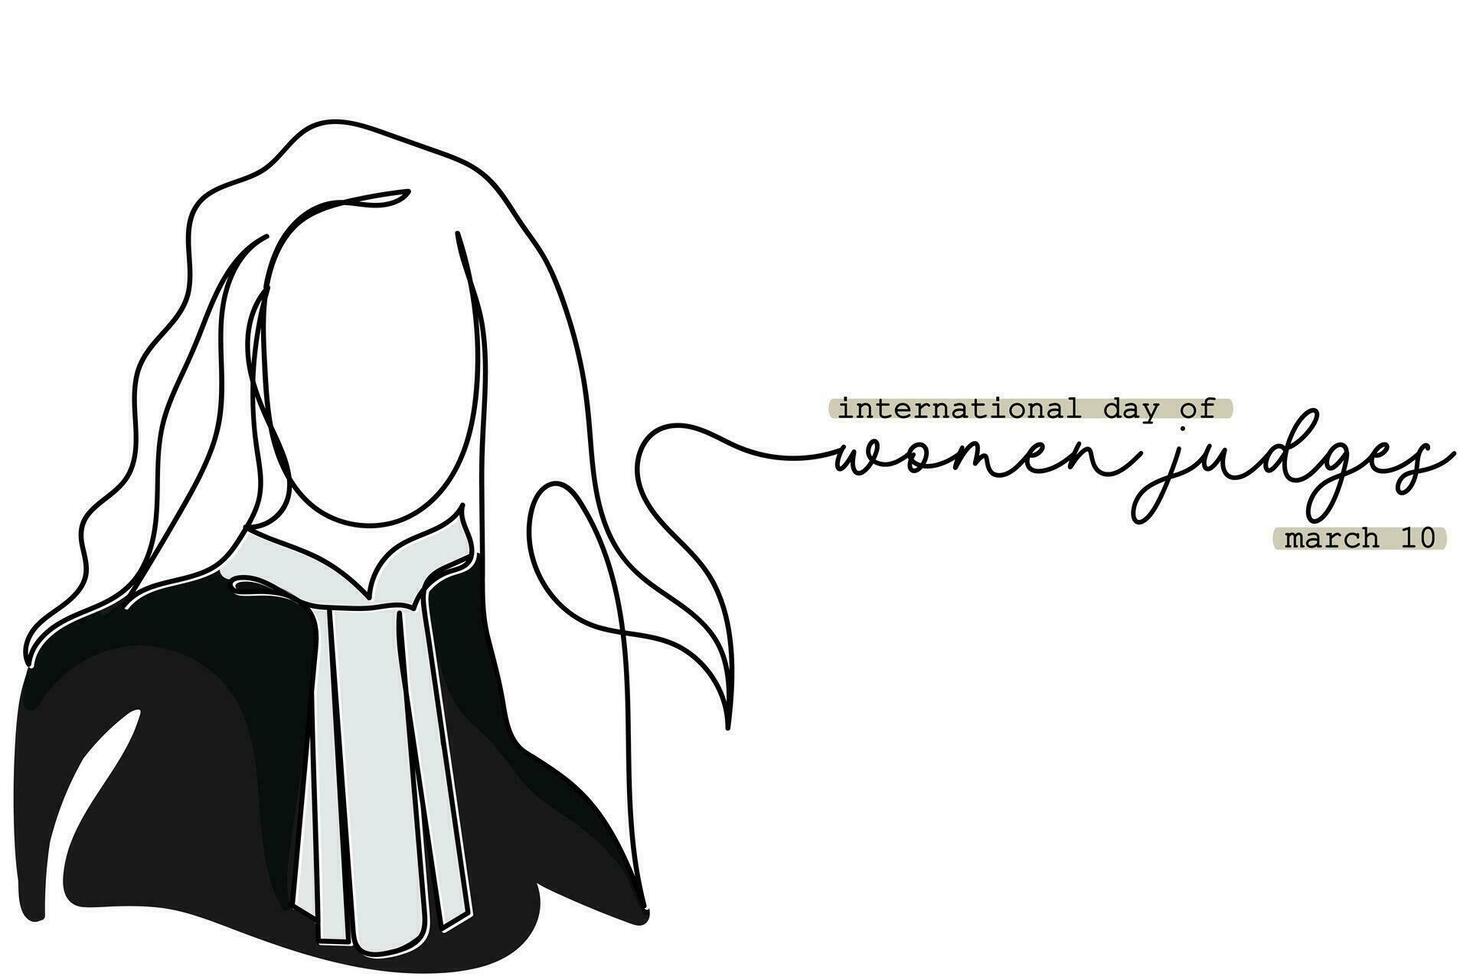 International day of women judges observed on 10 march every year. vector